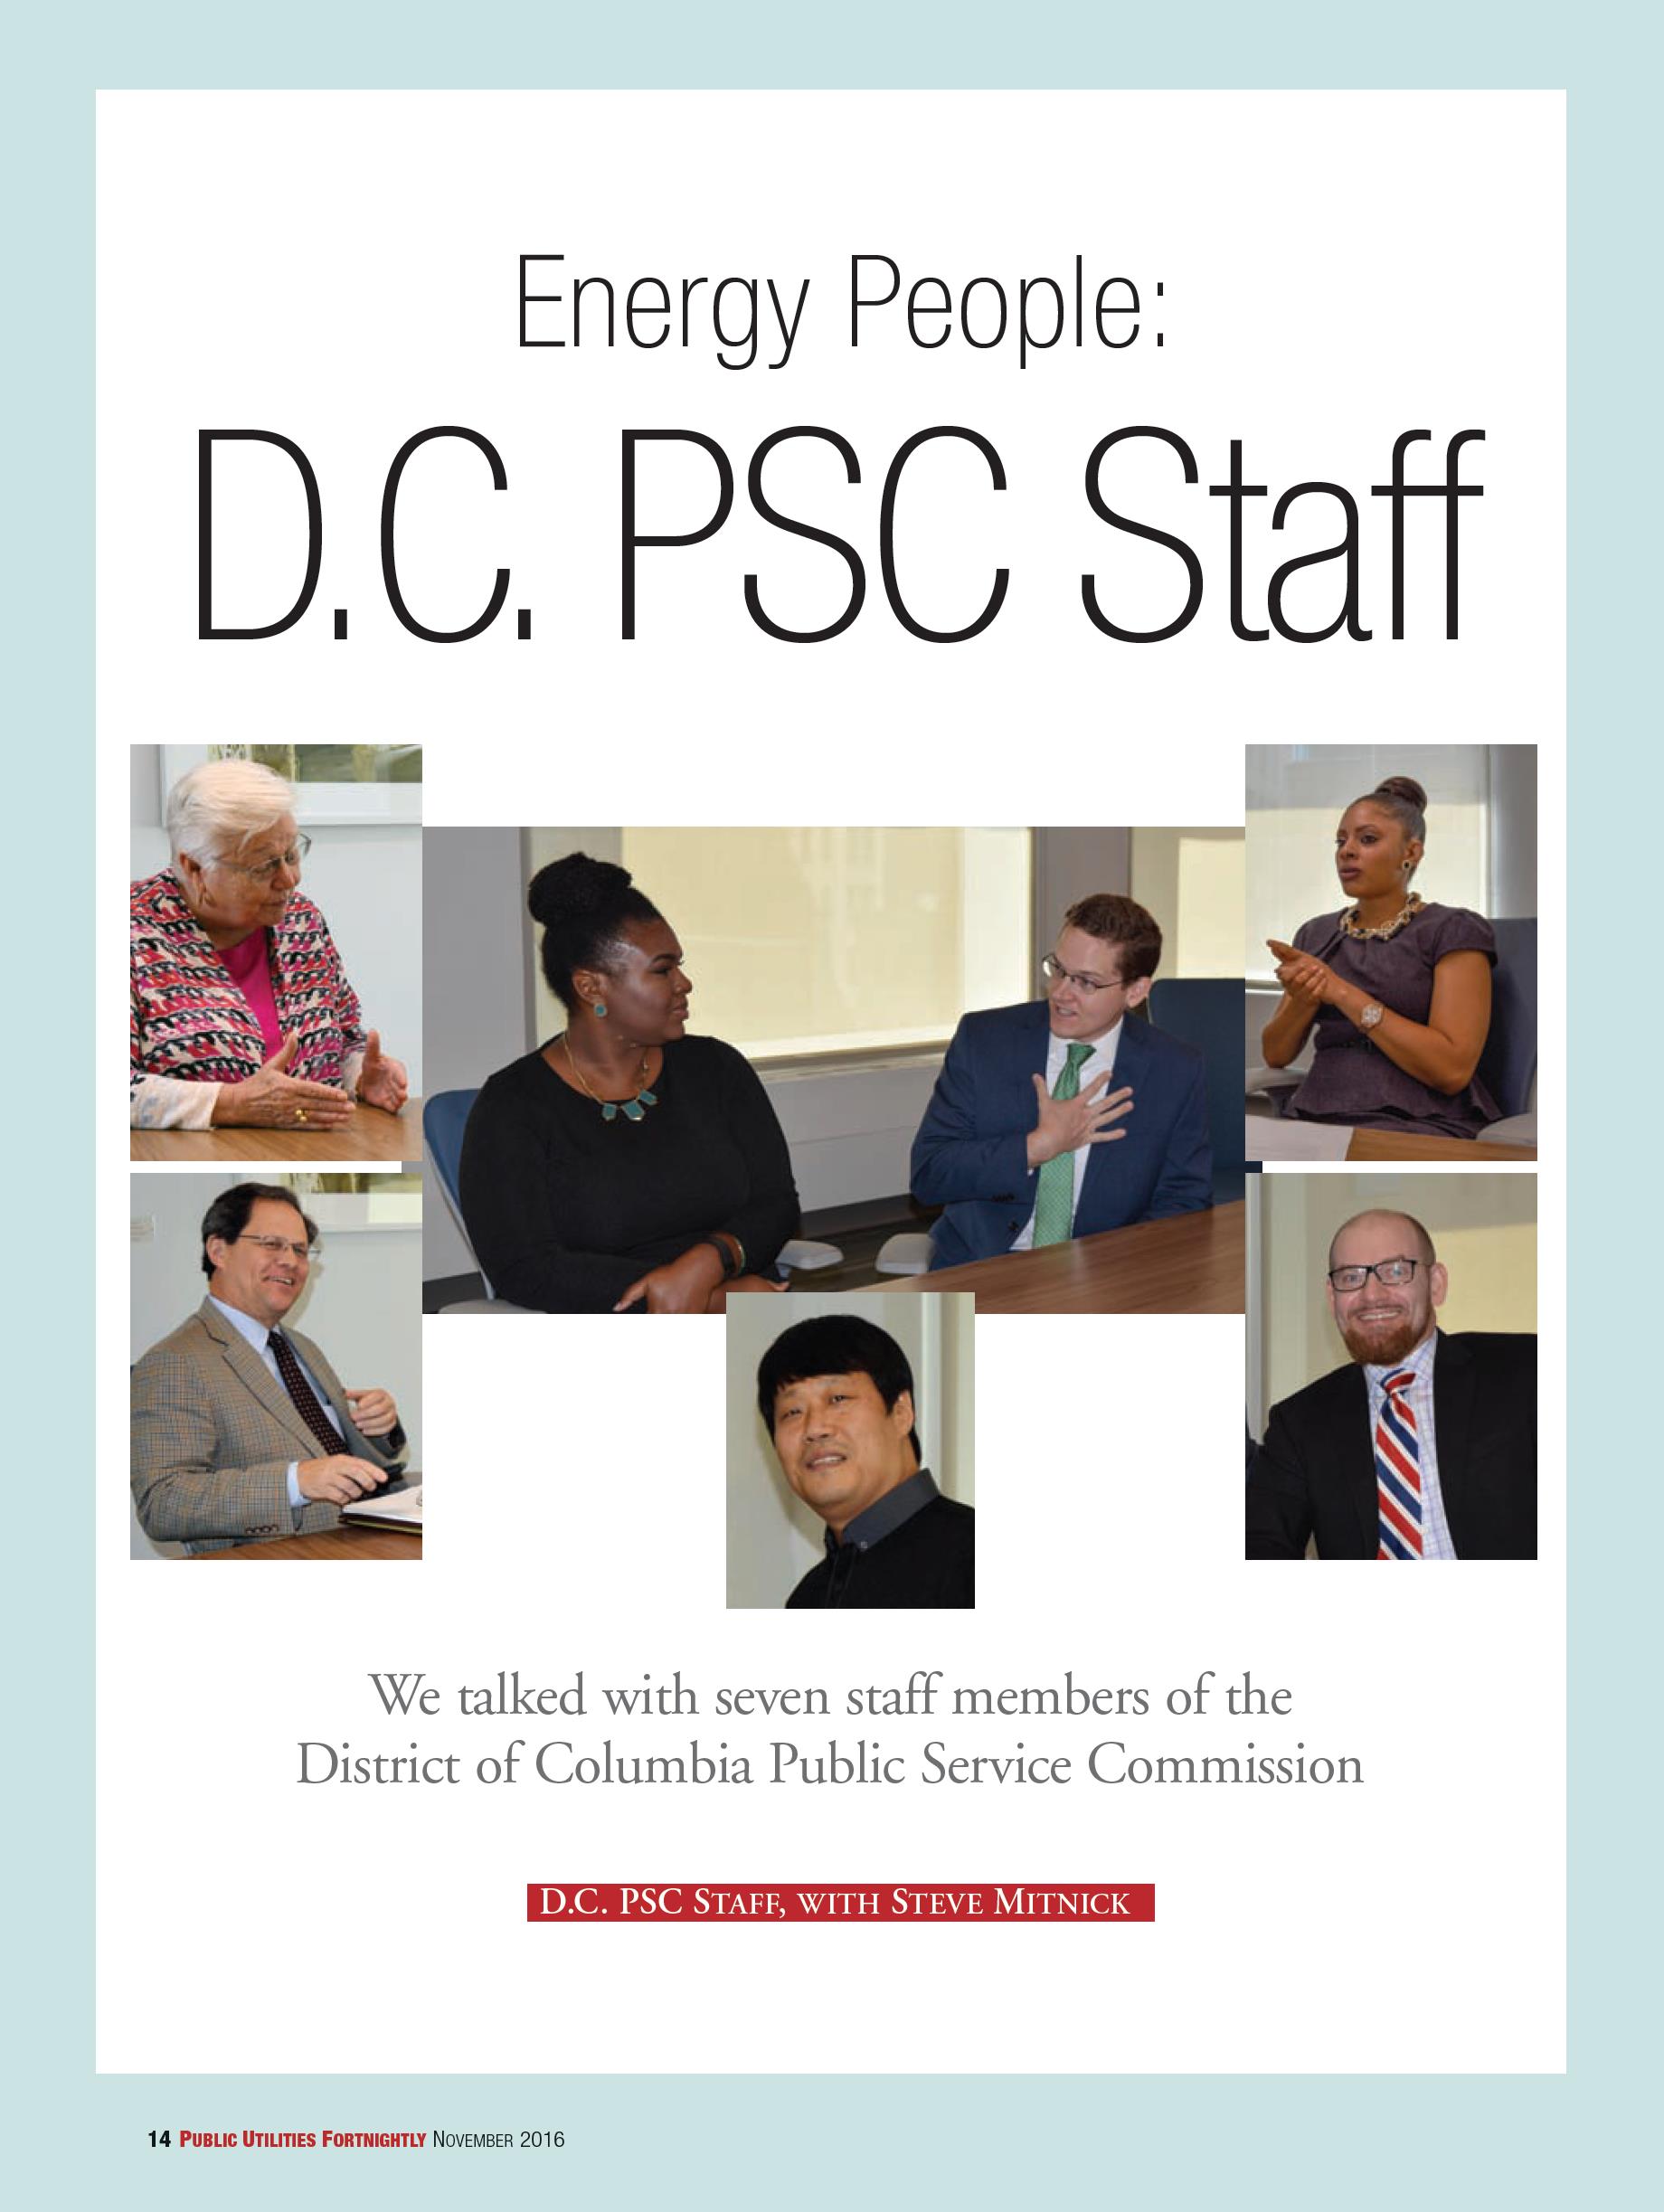 DCPSC Staff featured in the November issue of Public Utilities Fortnightly